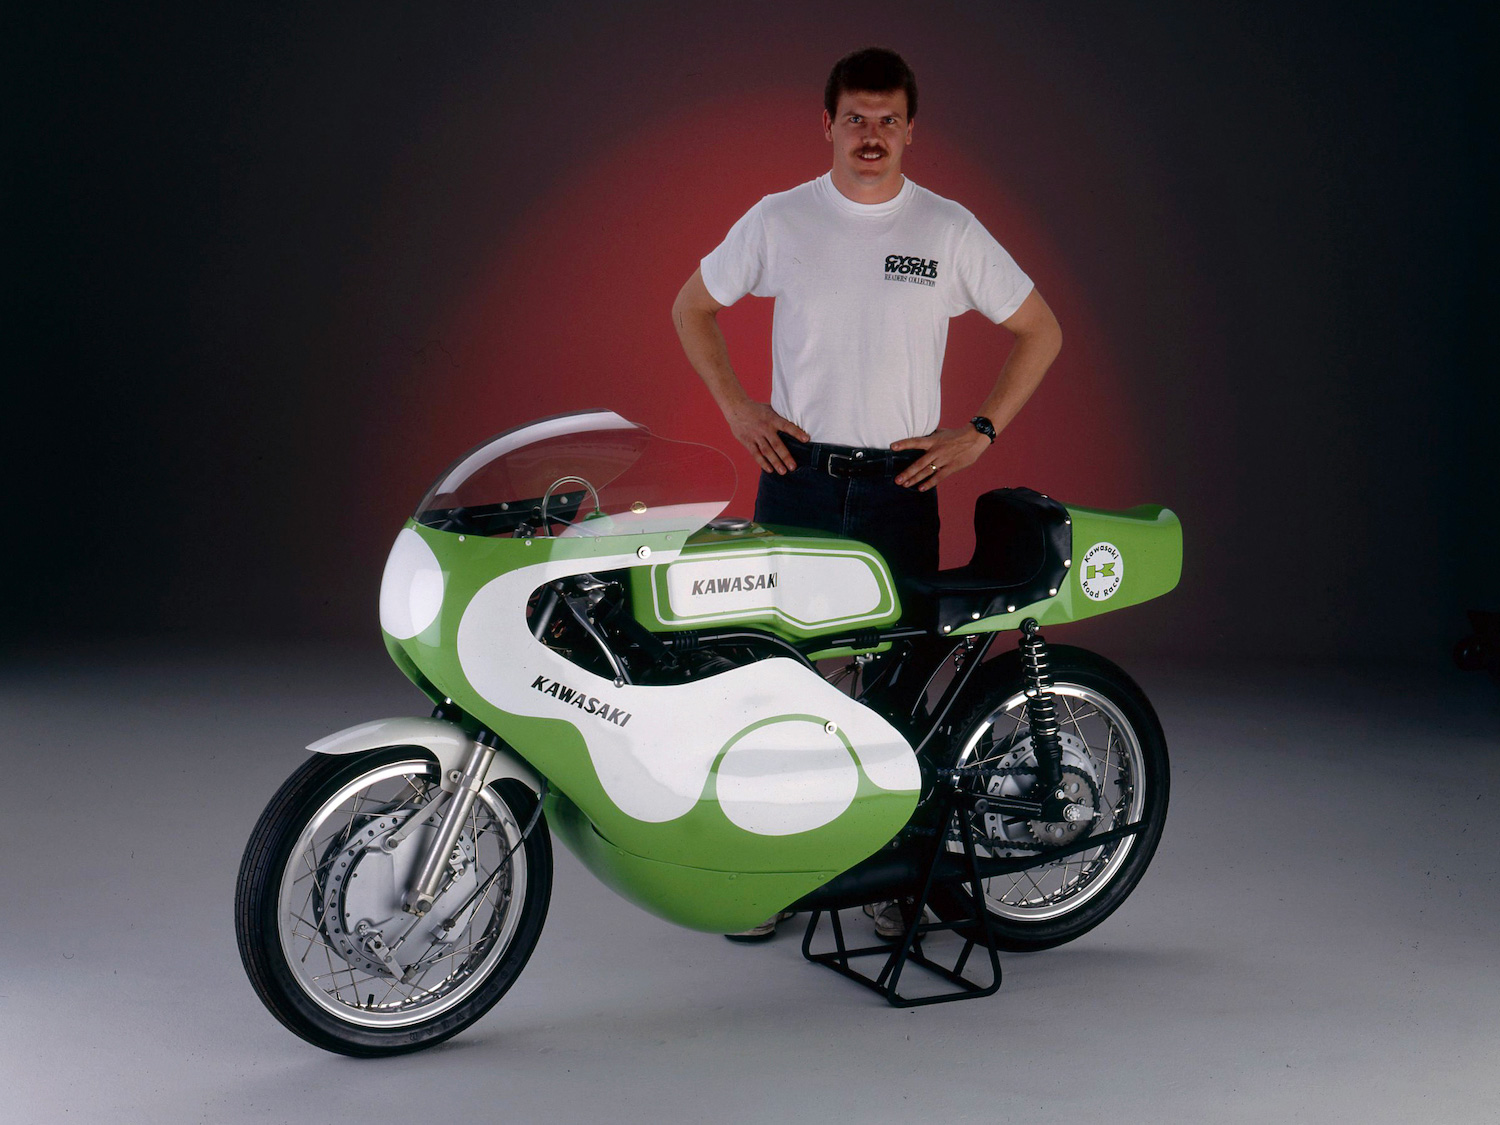 Stor Erfaren person Marvel Making Our Two-Stroke Kawasaki Racebike Go The Distance | Cycle World